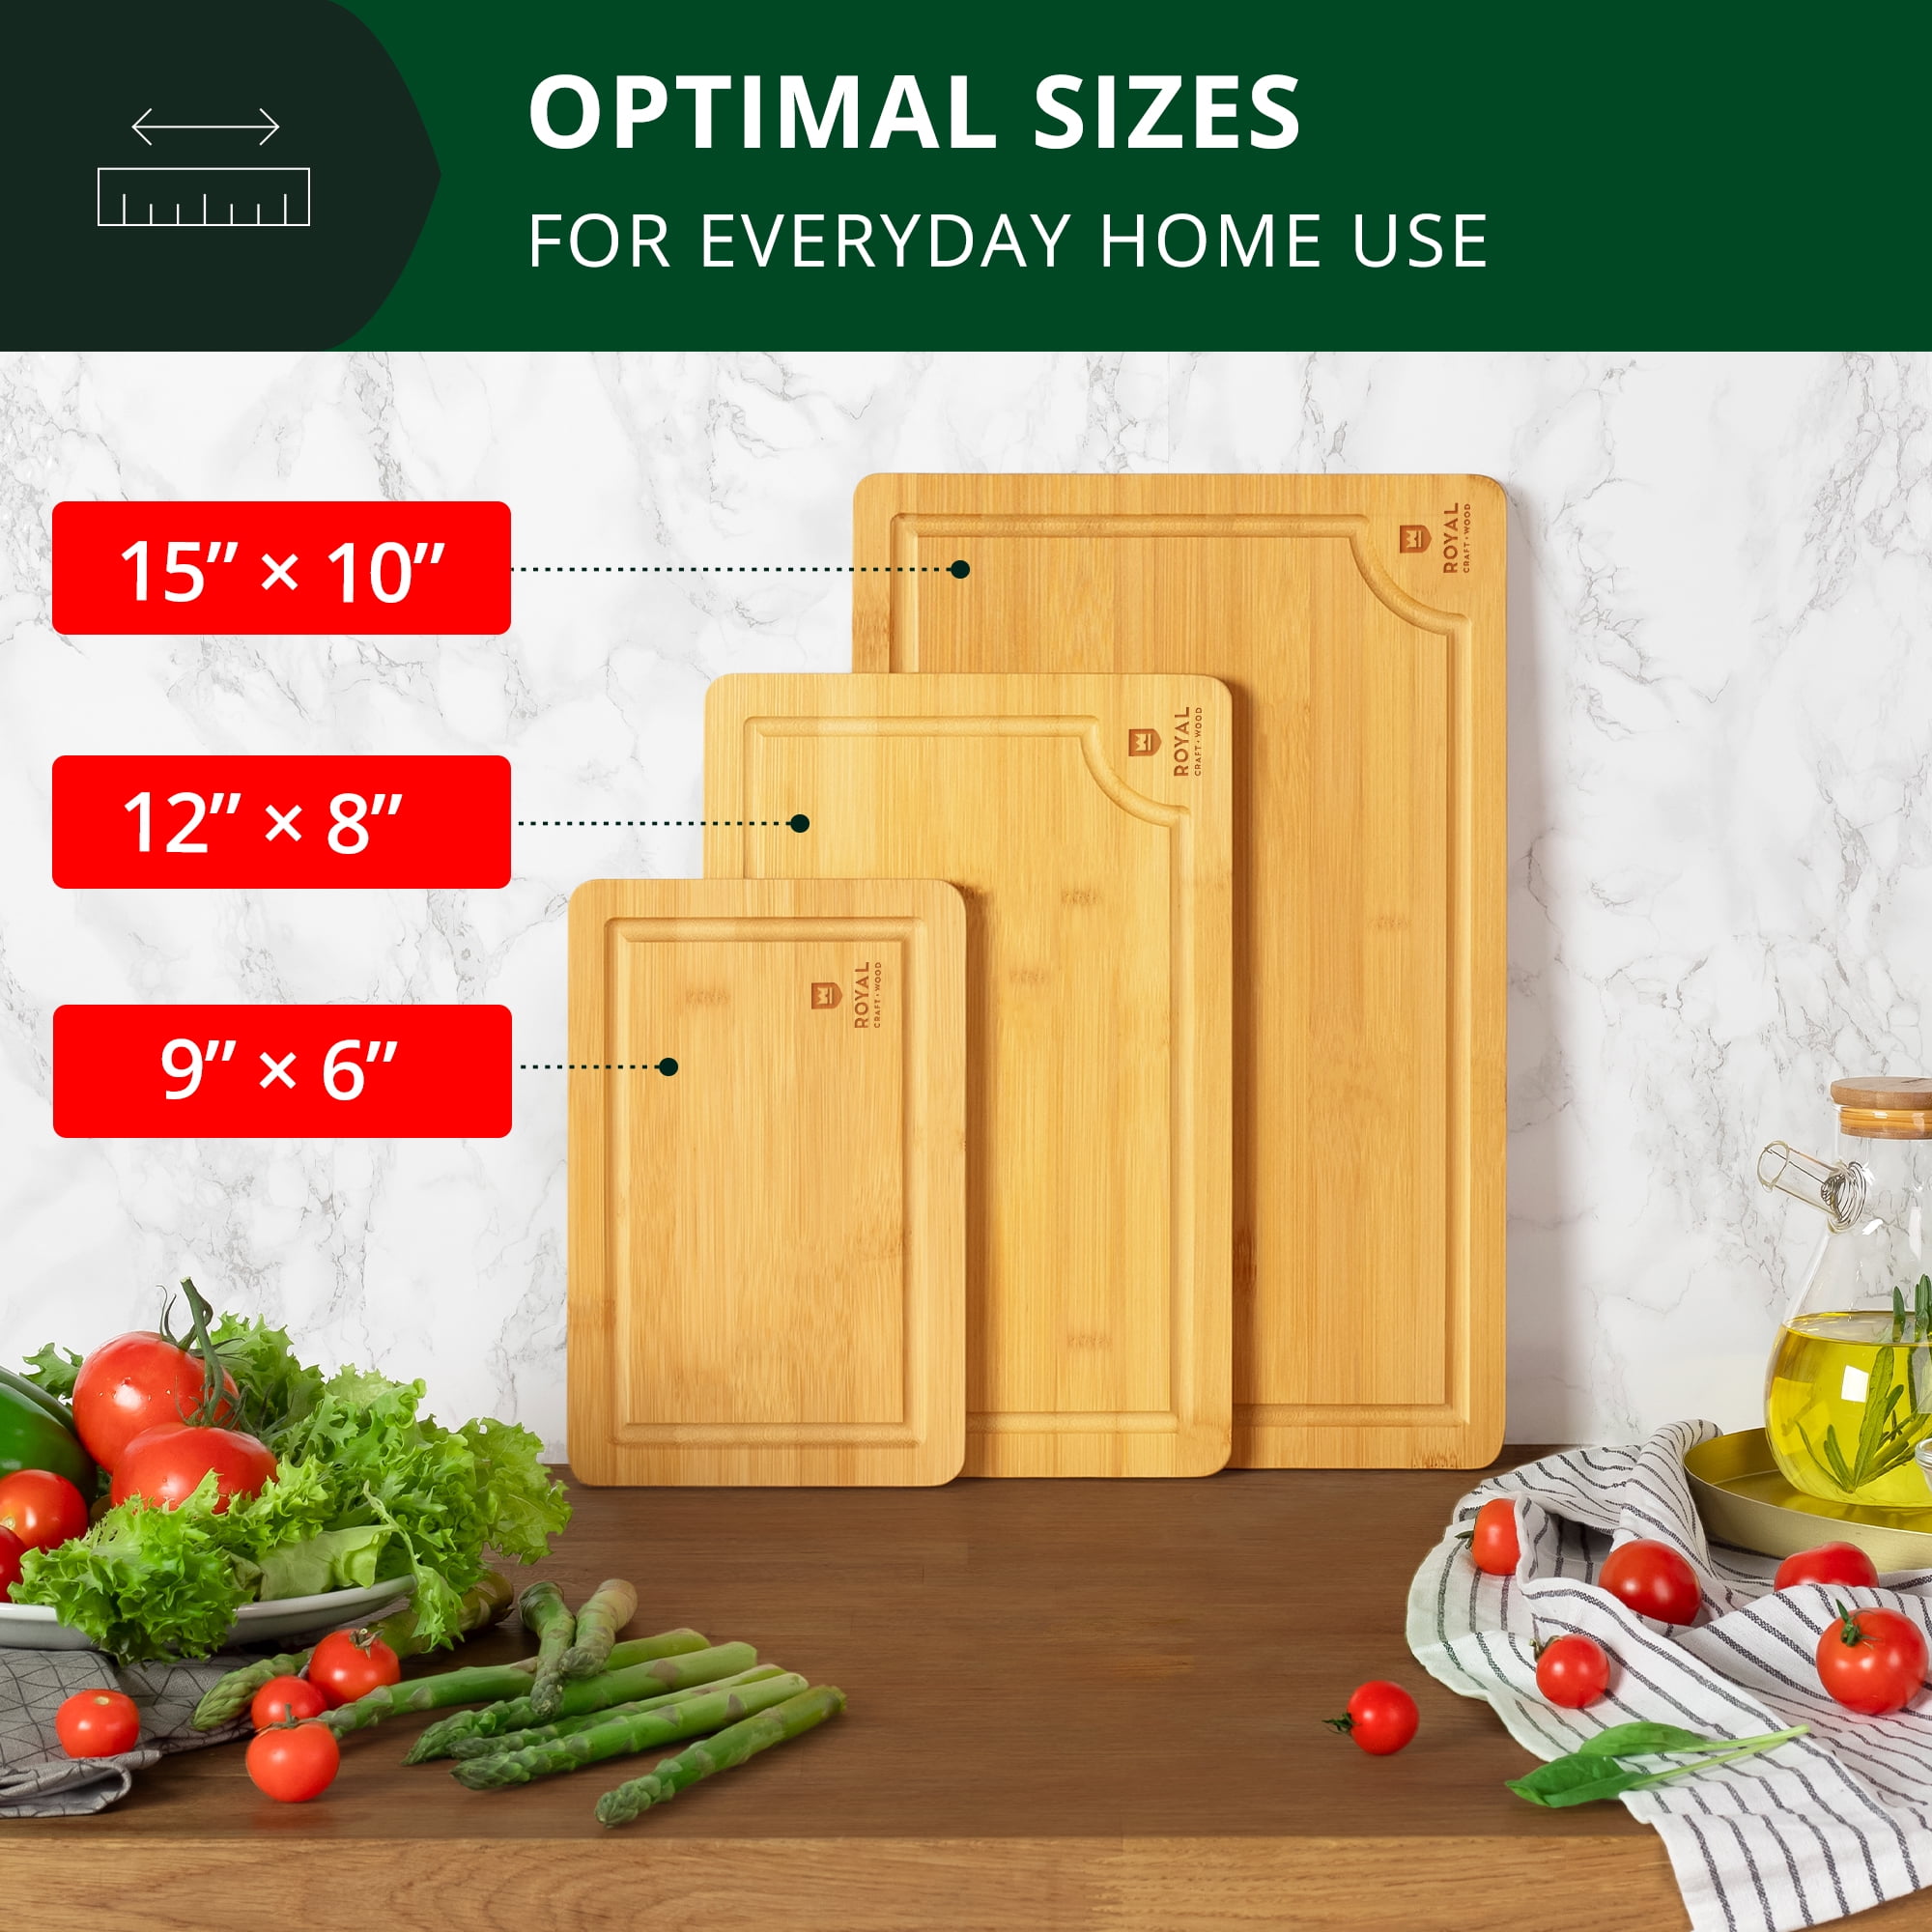 Snagshout  Double Sided Cutting Boards for Kitchen - Large Bamboo and  Plastic Cutting Board, Dishwasher Safe Chopping Board, Reversible used for  Meat, Veggies, Fruits, Easy Grip Handle, Non-Slip (BPA FREE)